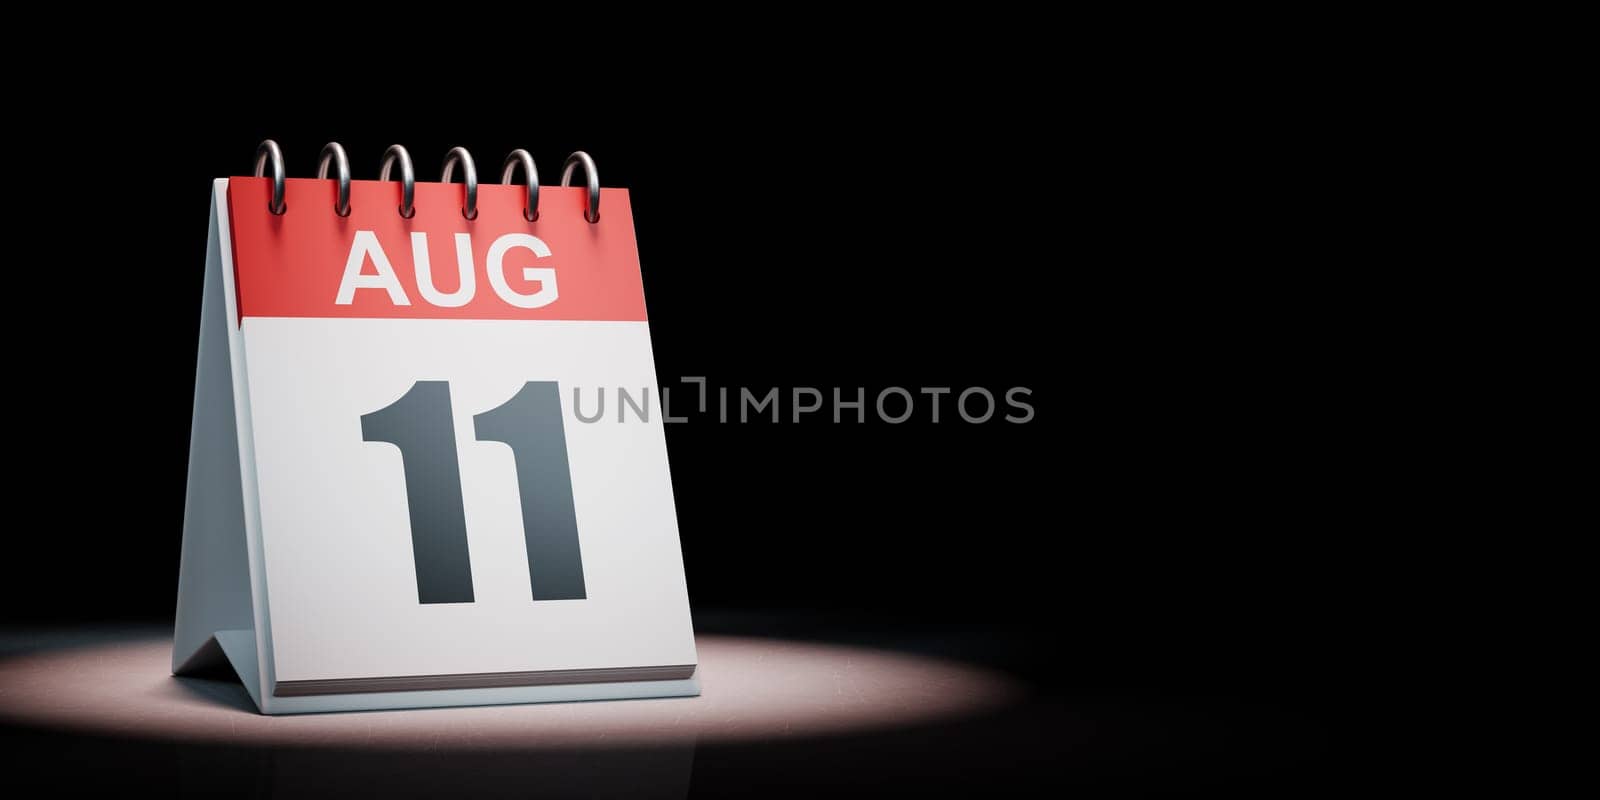 Red and White August 11 Desk Calendar Spotlighted on Black Background with Copy Space 3D Illustration